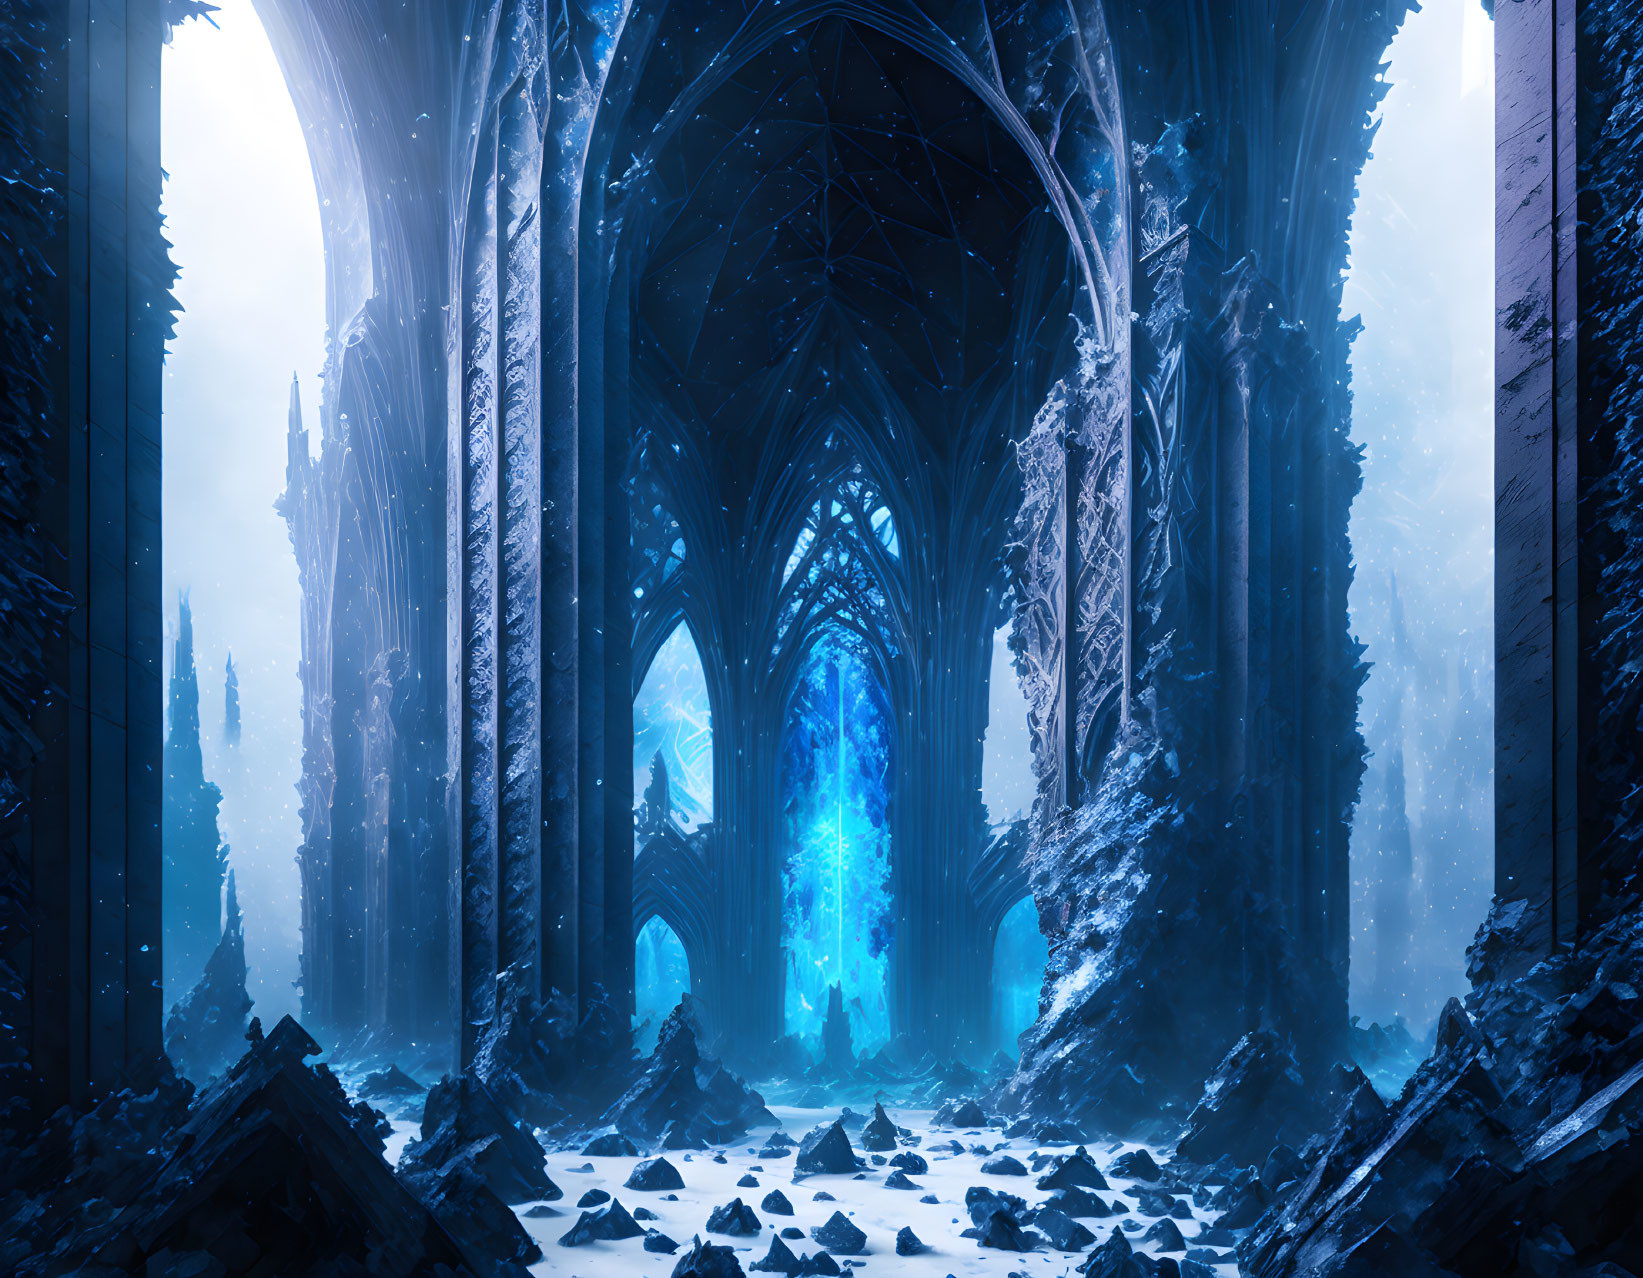 Fallen cathedral